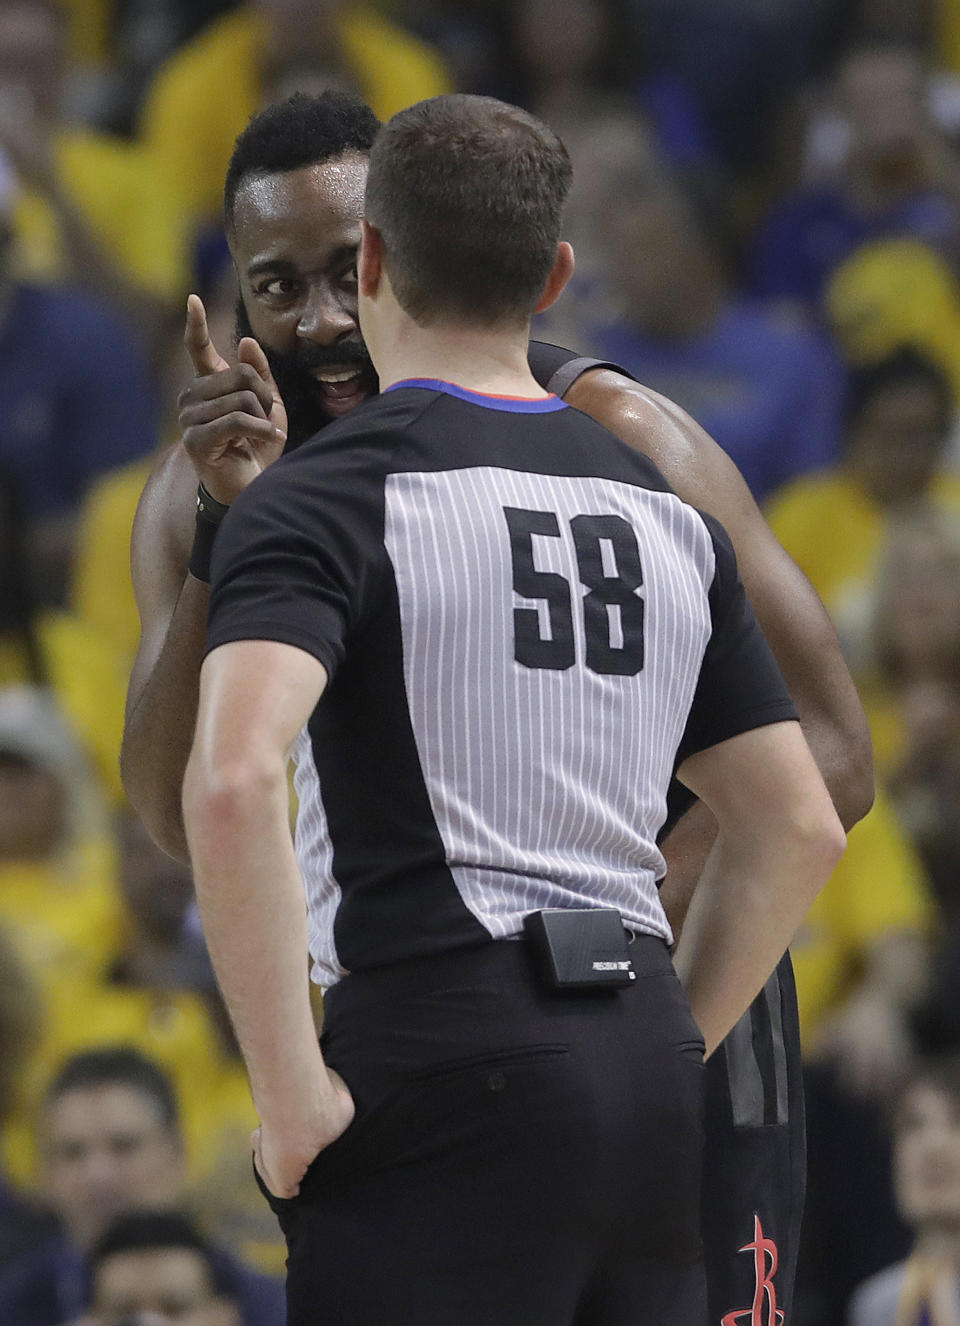 Houston Rockets guard James Harden, rear, talks to referee Josh Tiven during the first half of Game 1 of a second-round NBA basketball playoff series between the Golden State Warriors and the Rockets in Oakland, Calif., Sunday, April 28, 2019. (AP Photo/Jeff Chiu)